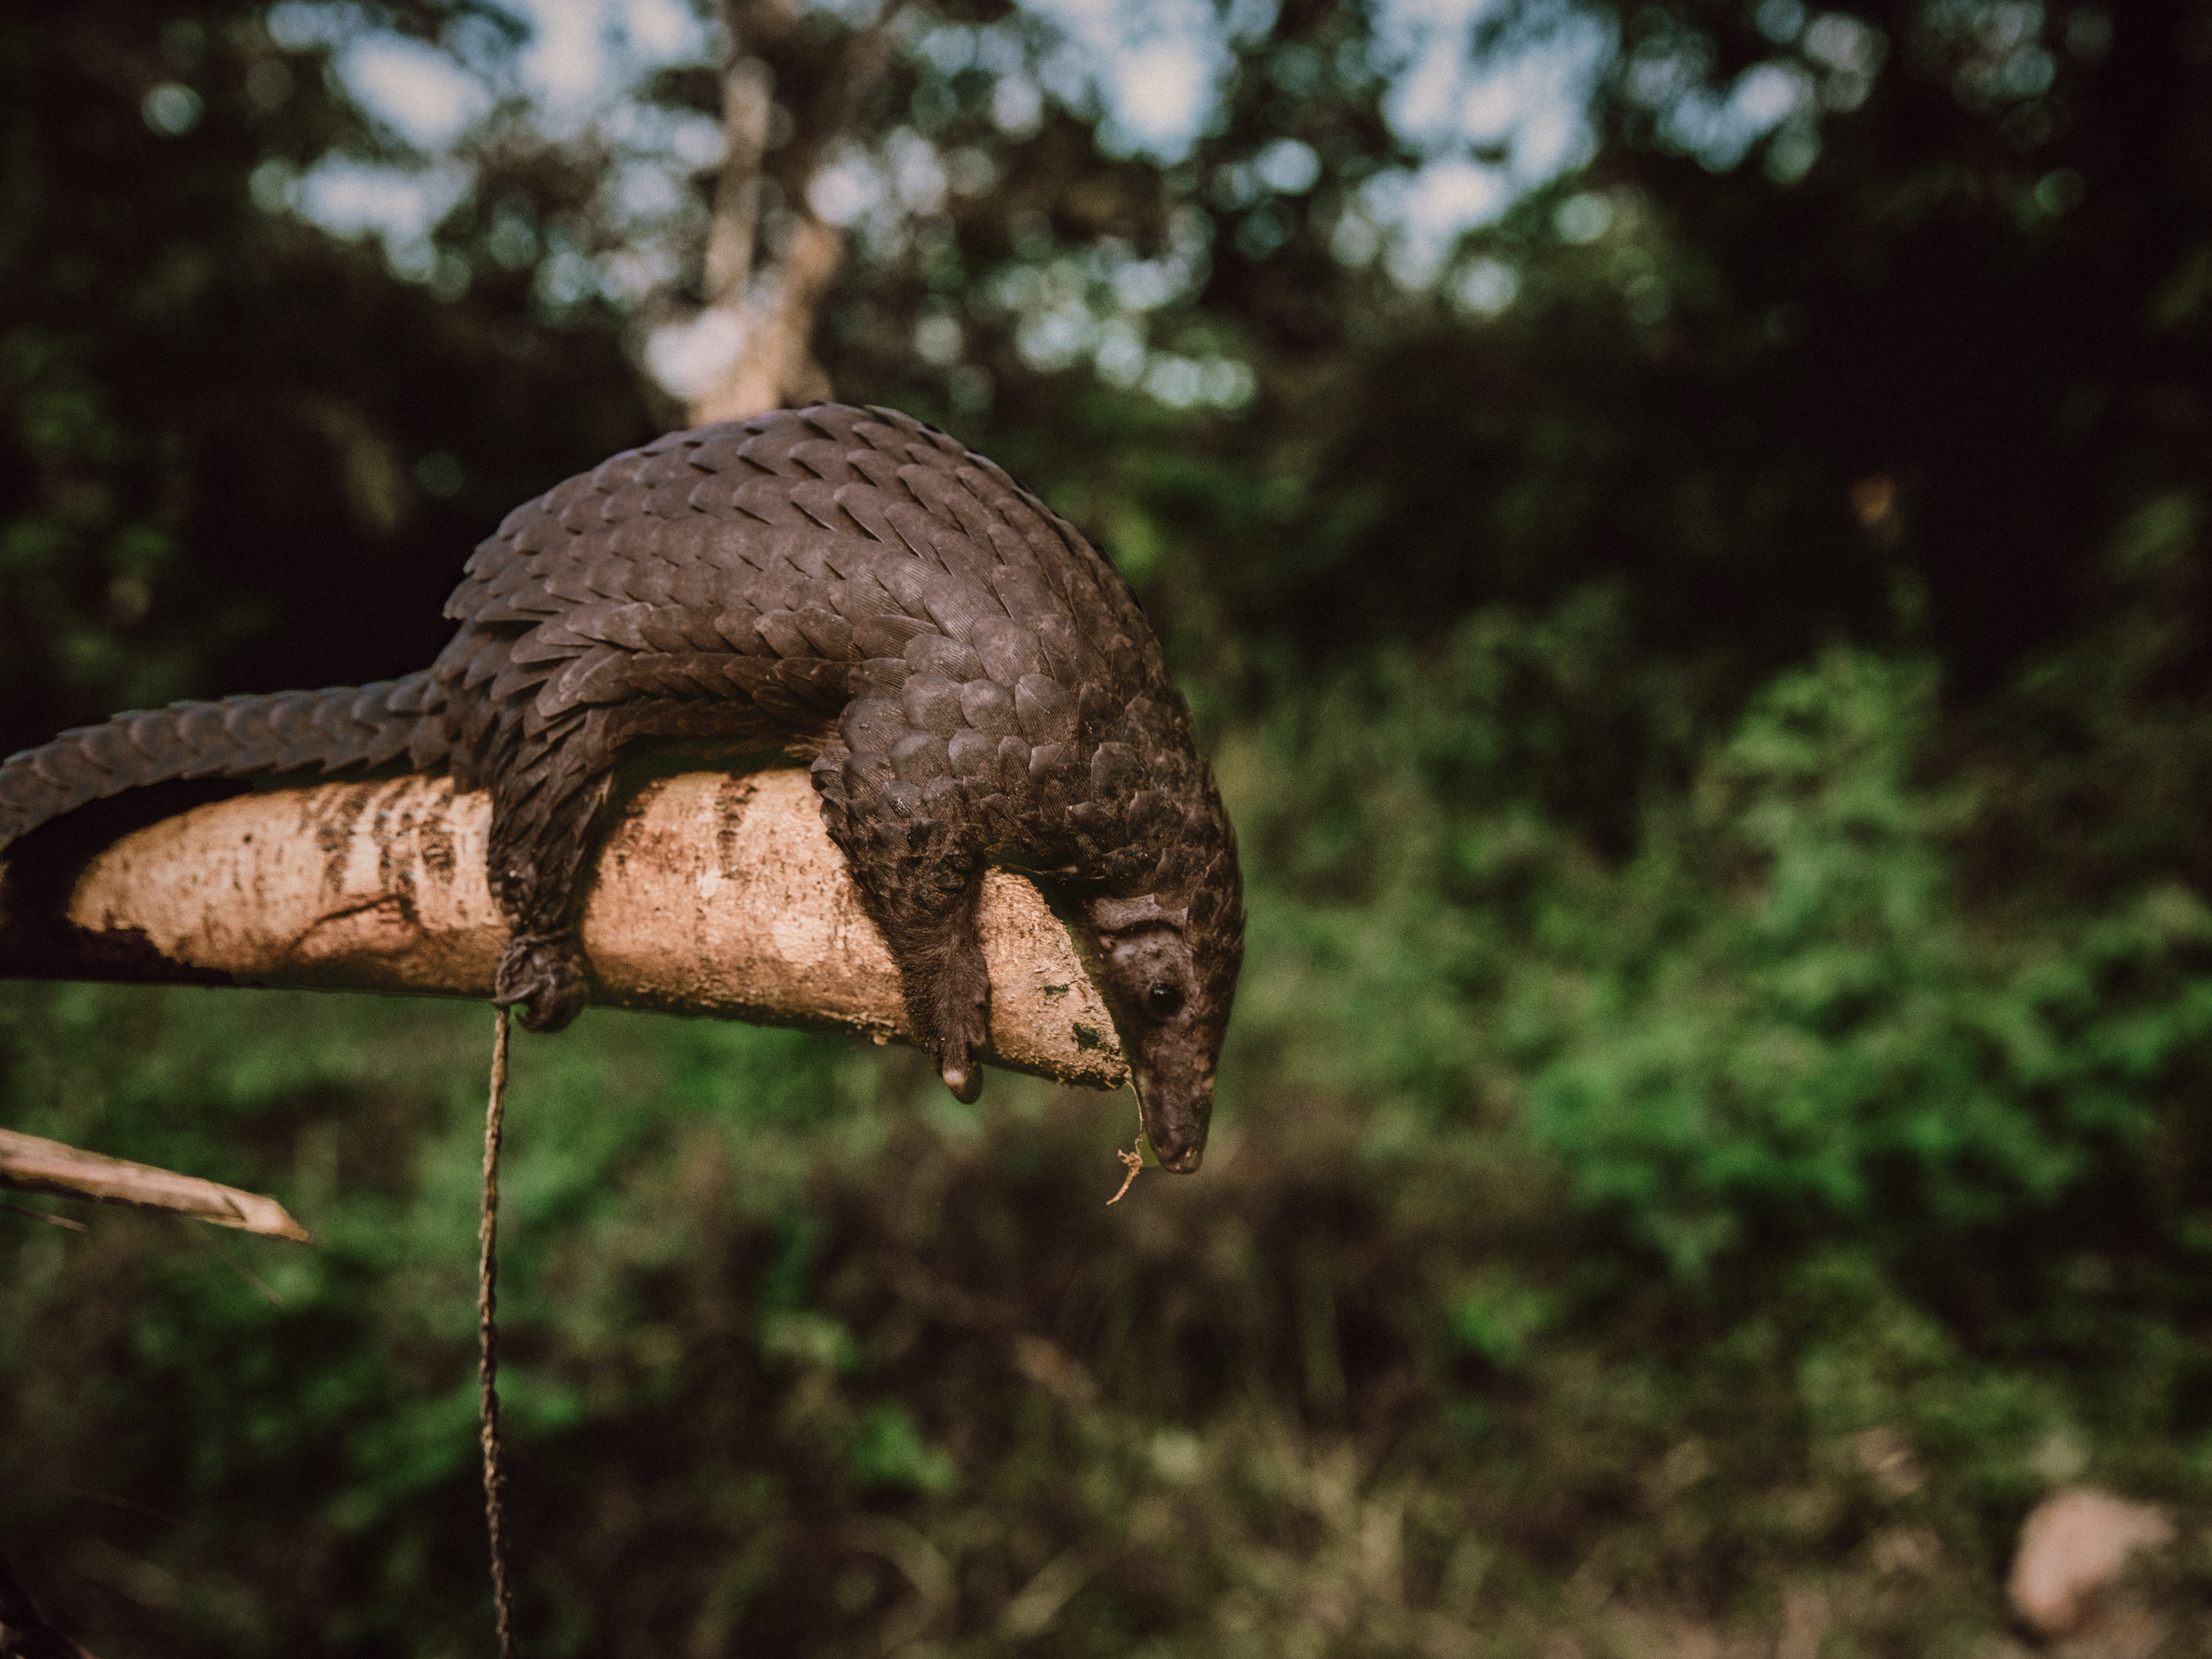 A pangolin captured by hunters in the Ituri rainforest, in Mambasa territory, Democratic Republic of the Congo, 19 October 2020.